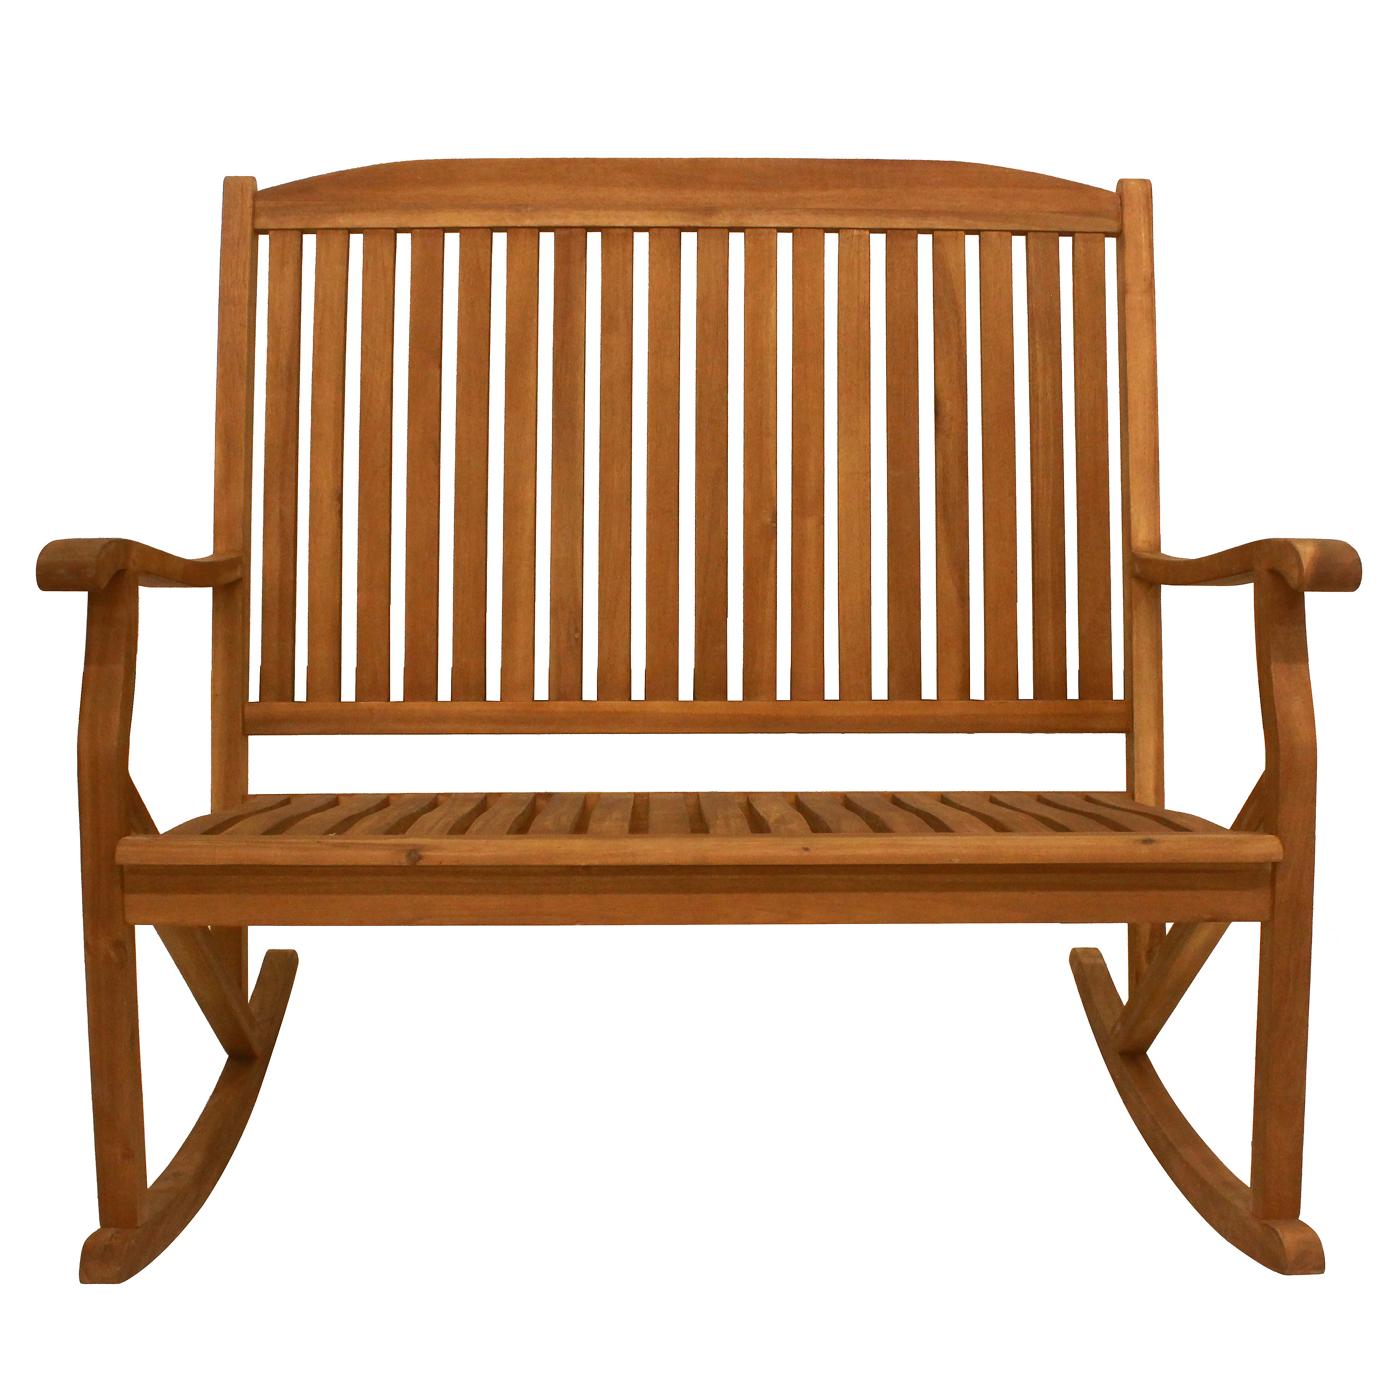 Leigh Country Sequoia Natural Rocker Bench; image 4 of 4